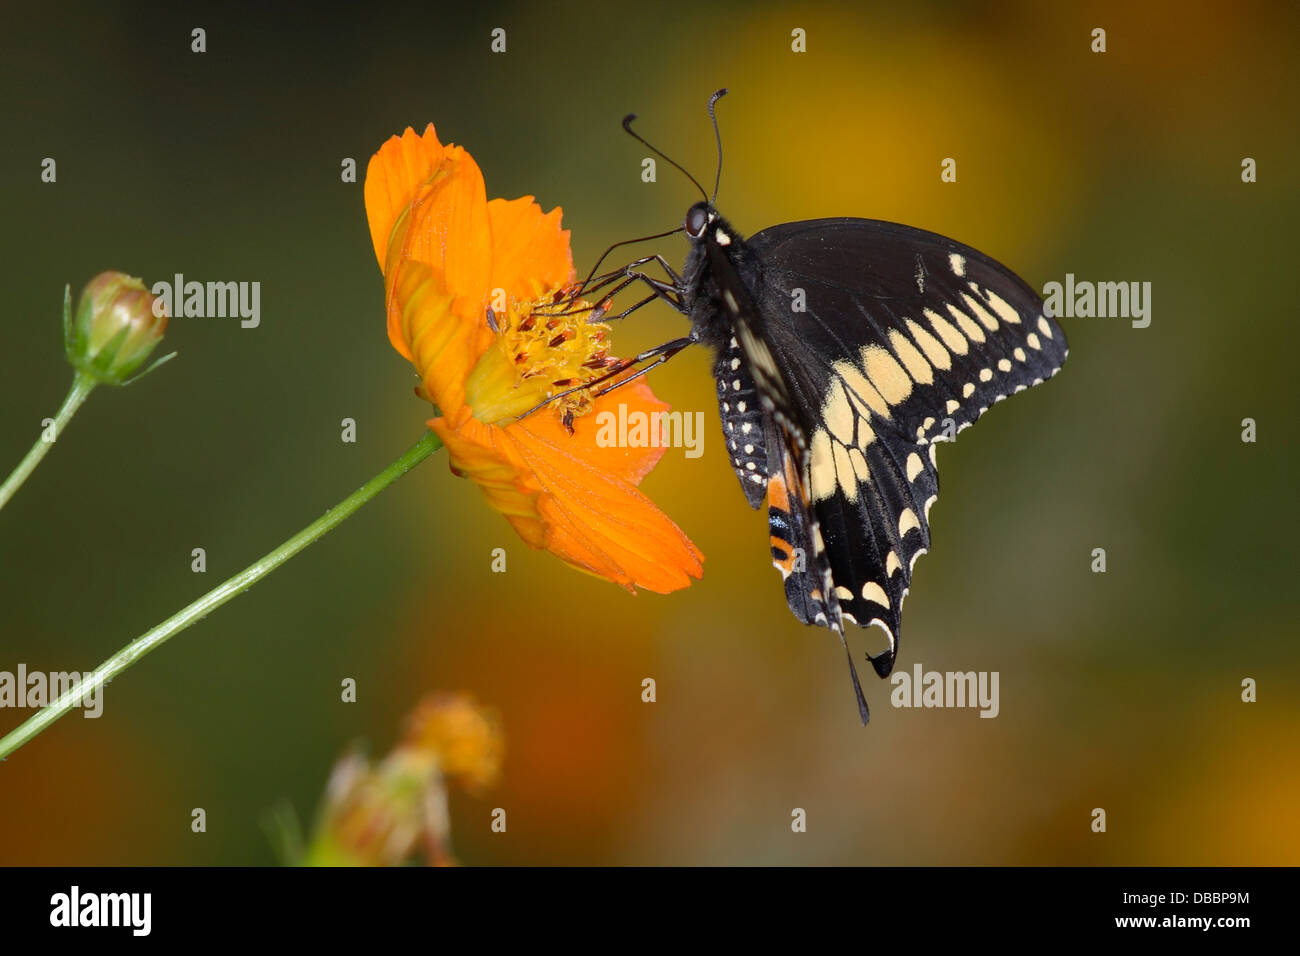 A Butterfly, The Black Swallowtail On An Orange Flower, Papilio polyxenes Fabricius Stock Photo